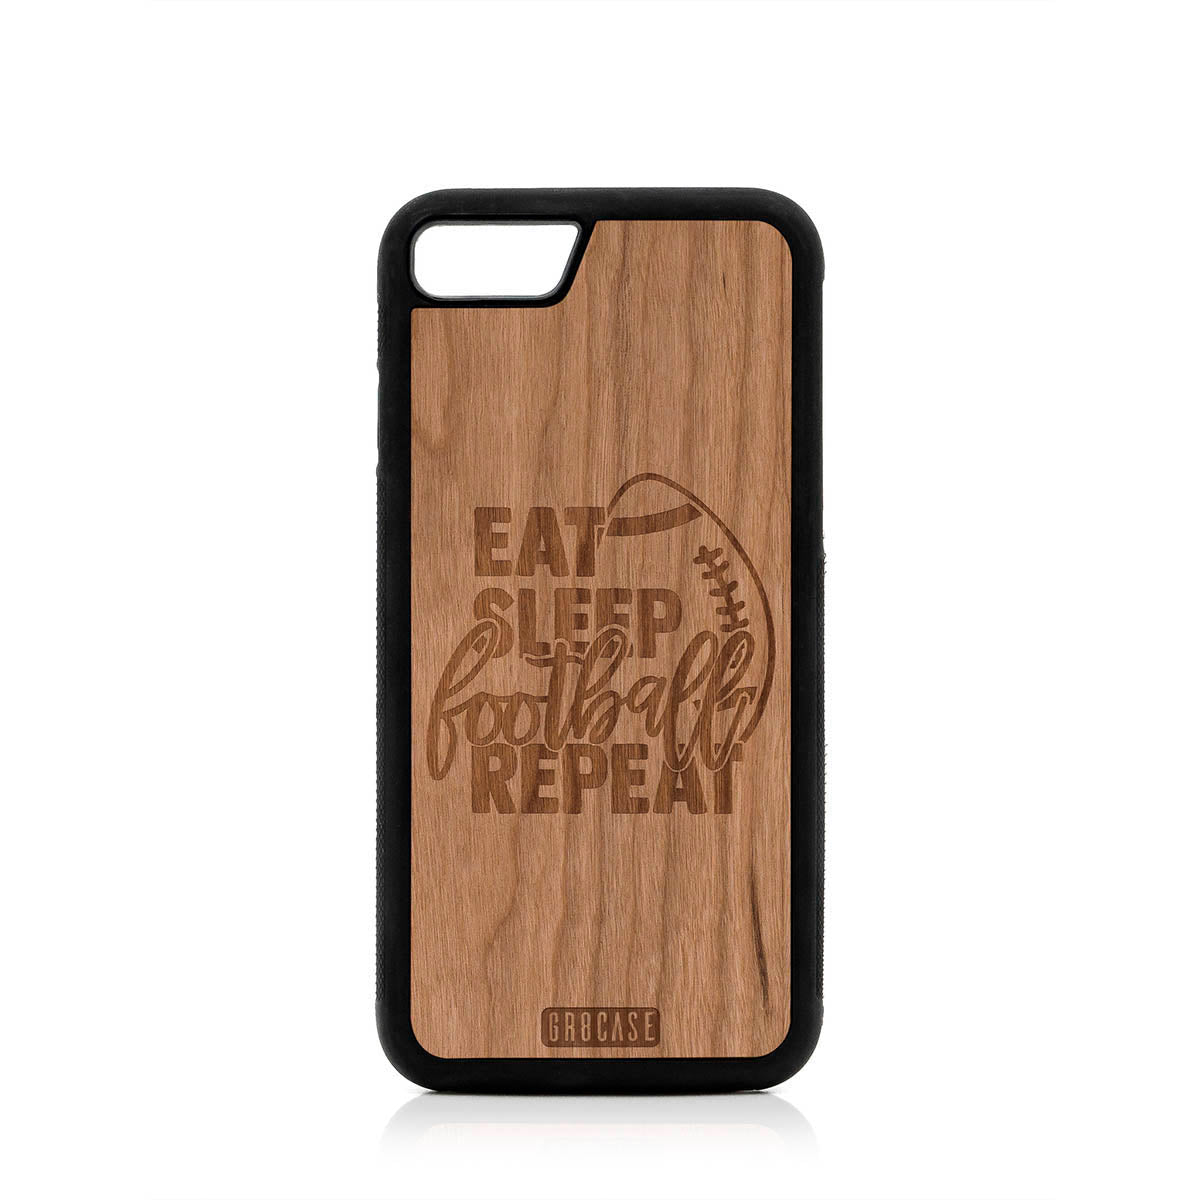 Eat Sleep Football Repeat Design Wood Case For iPhone 7/8